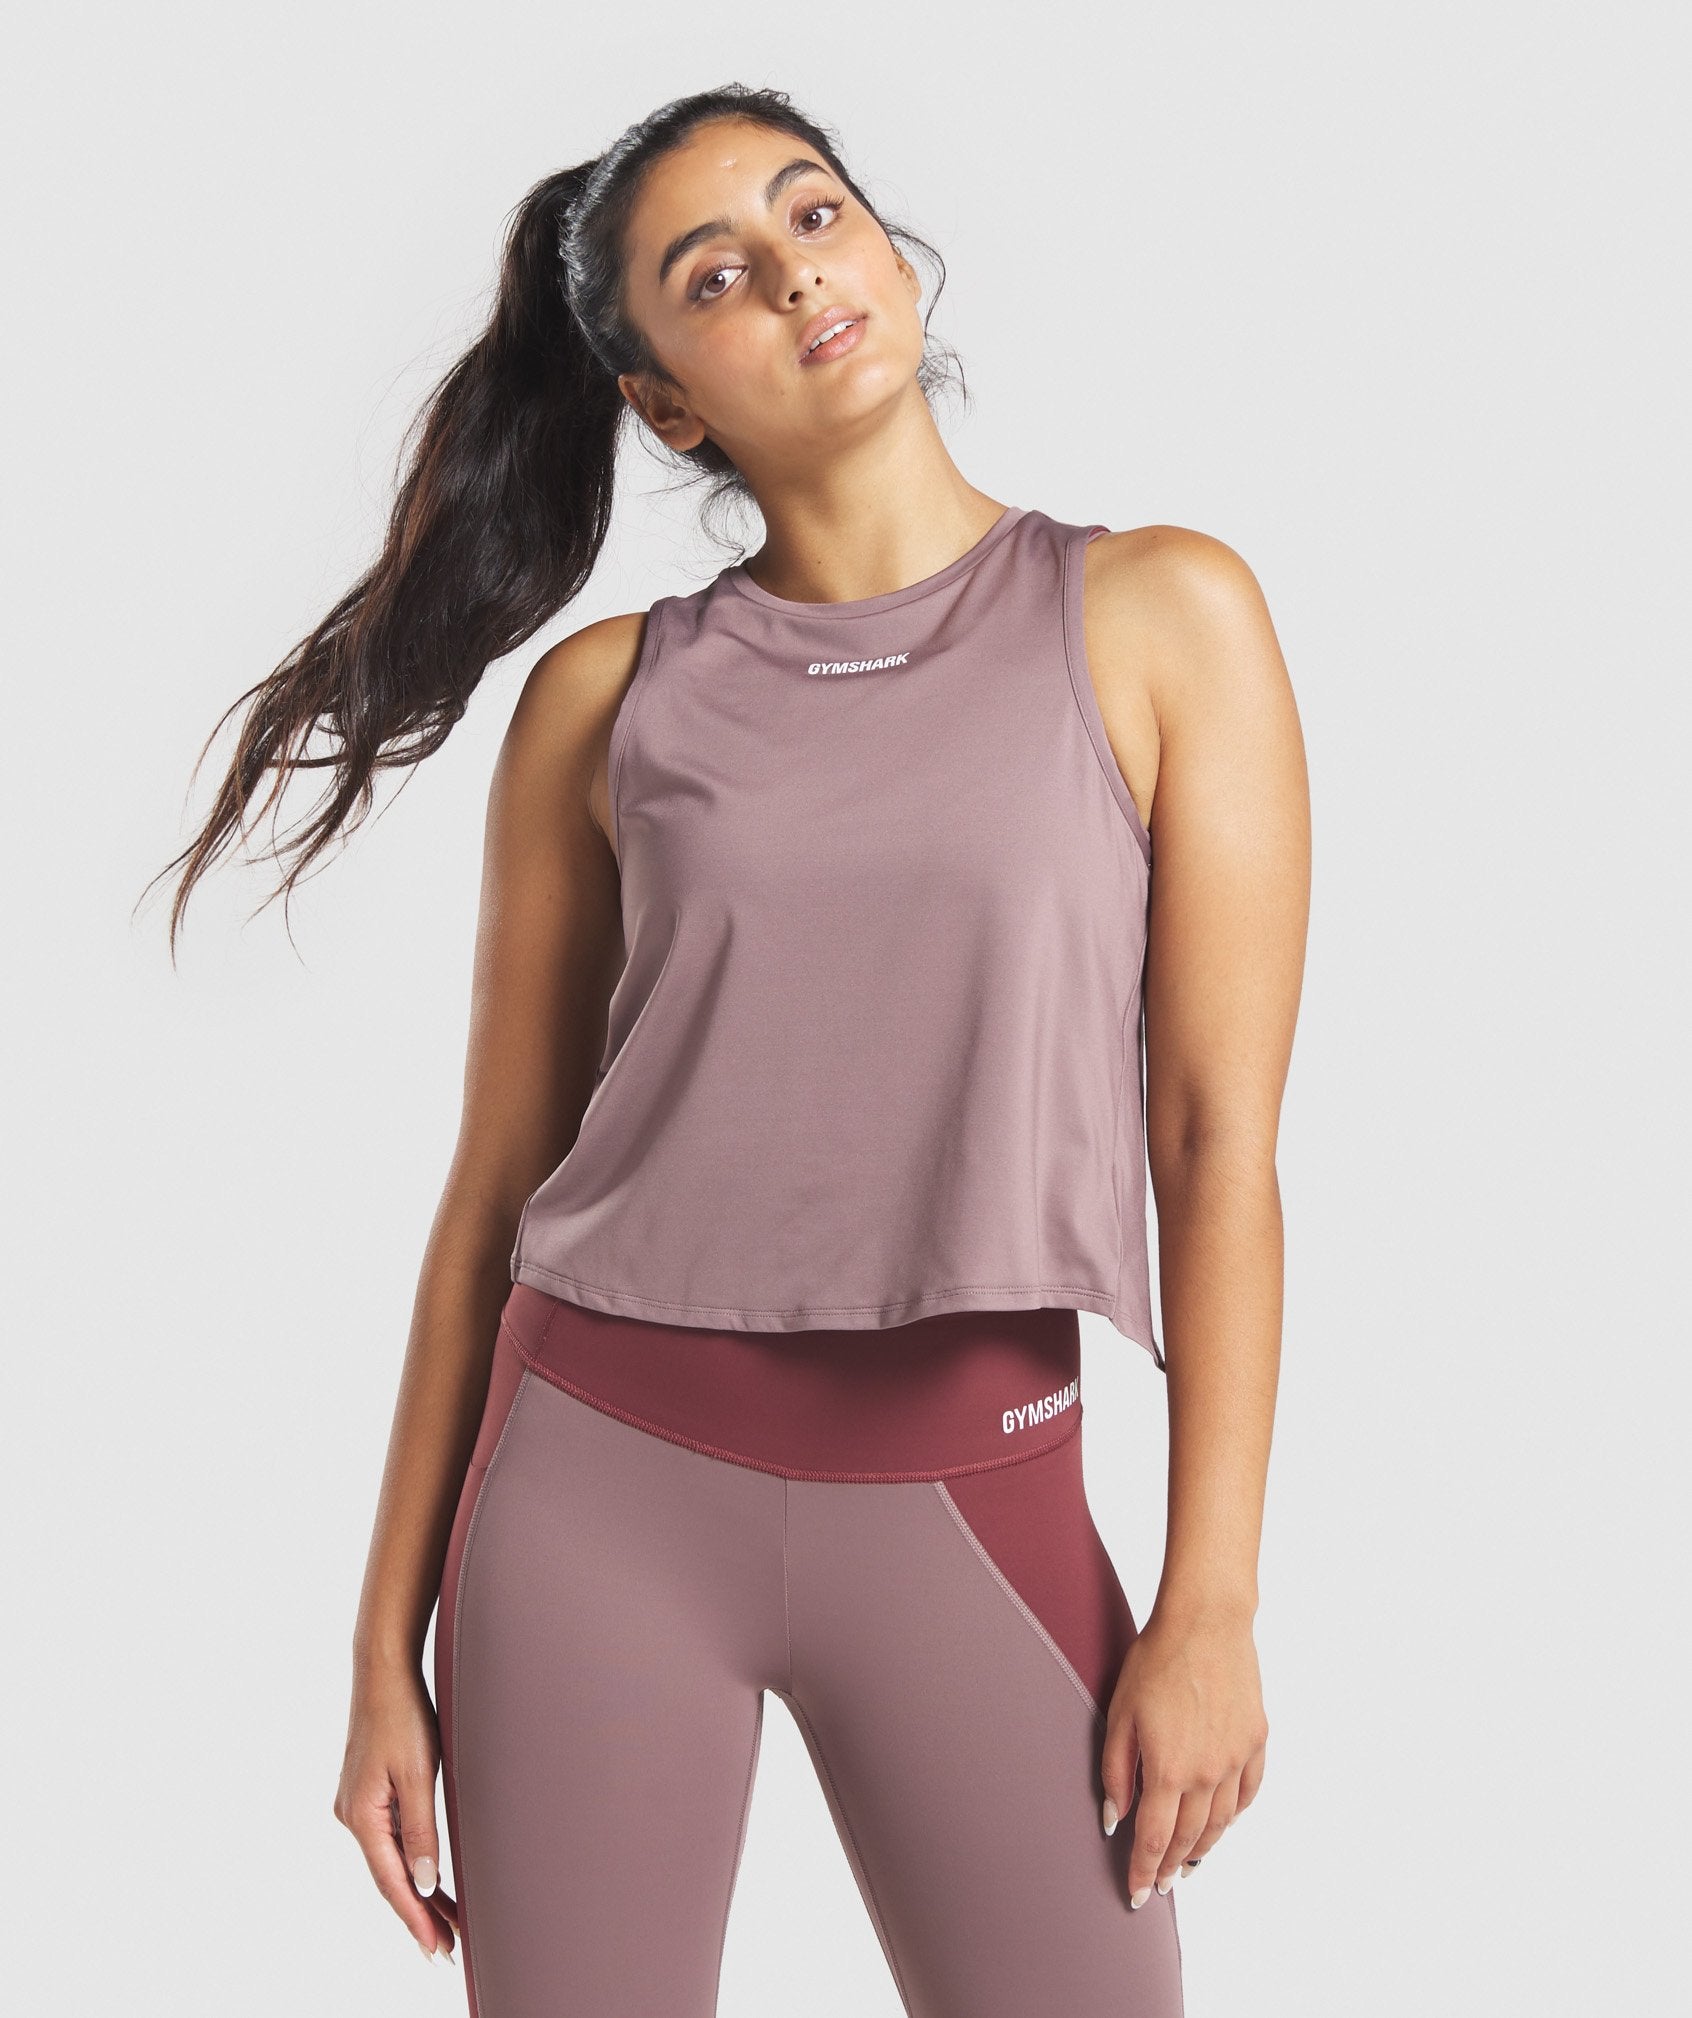 Euphoria Tank in Taupe - view 1